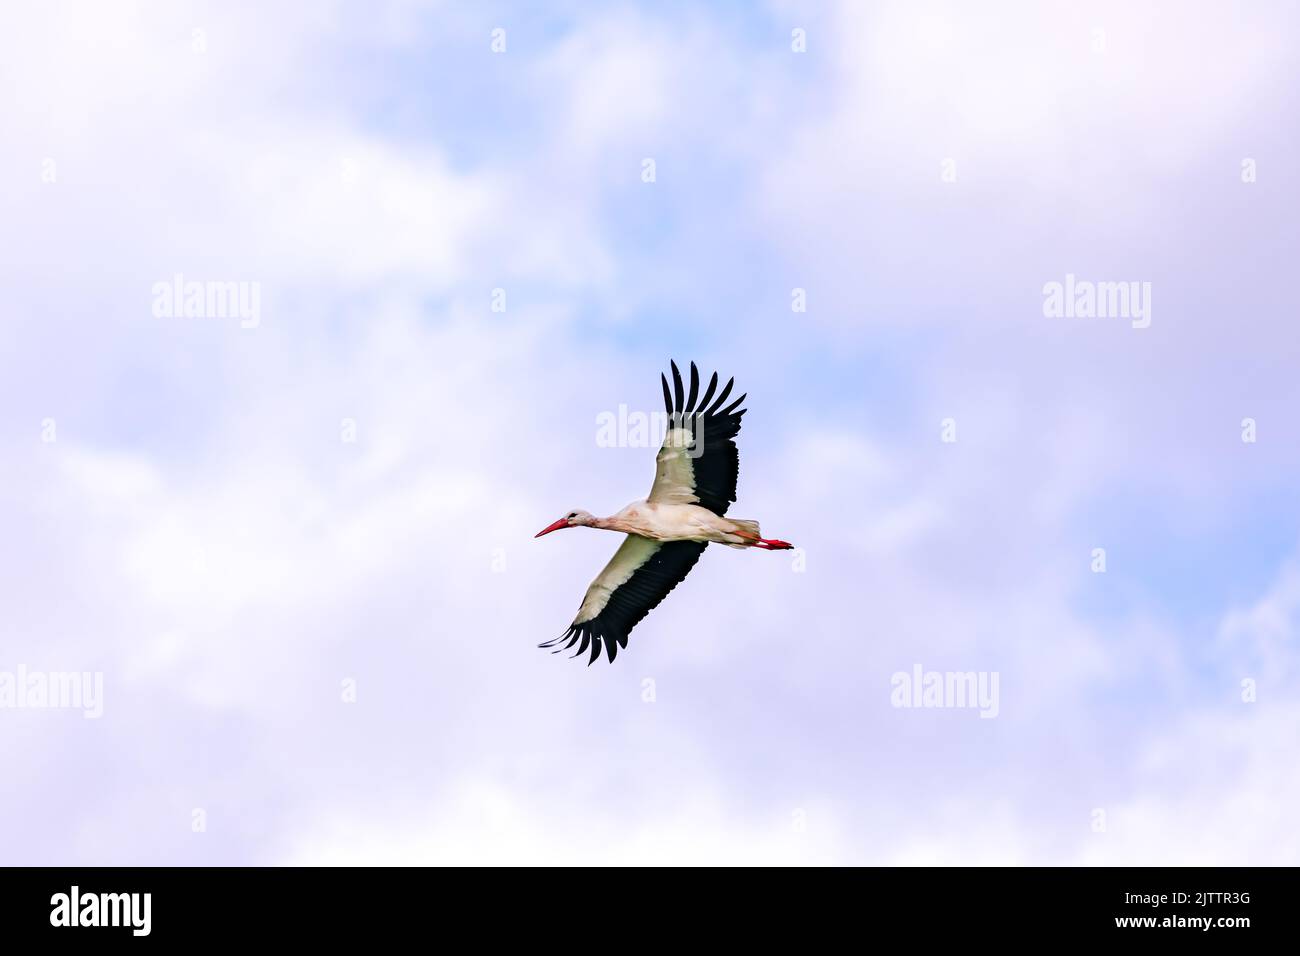 Close up of an alert stork gliding in flight on a cloudy day Stock Photo